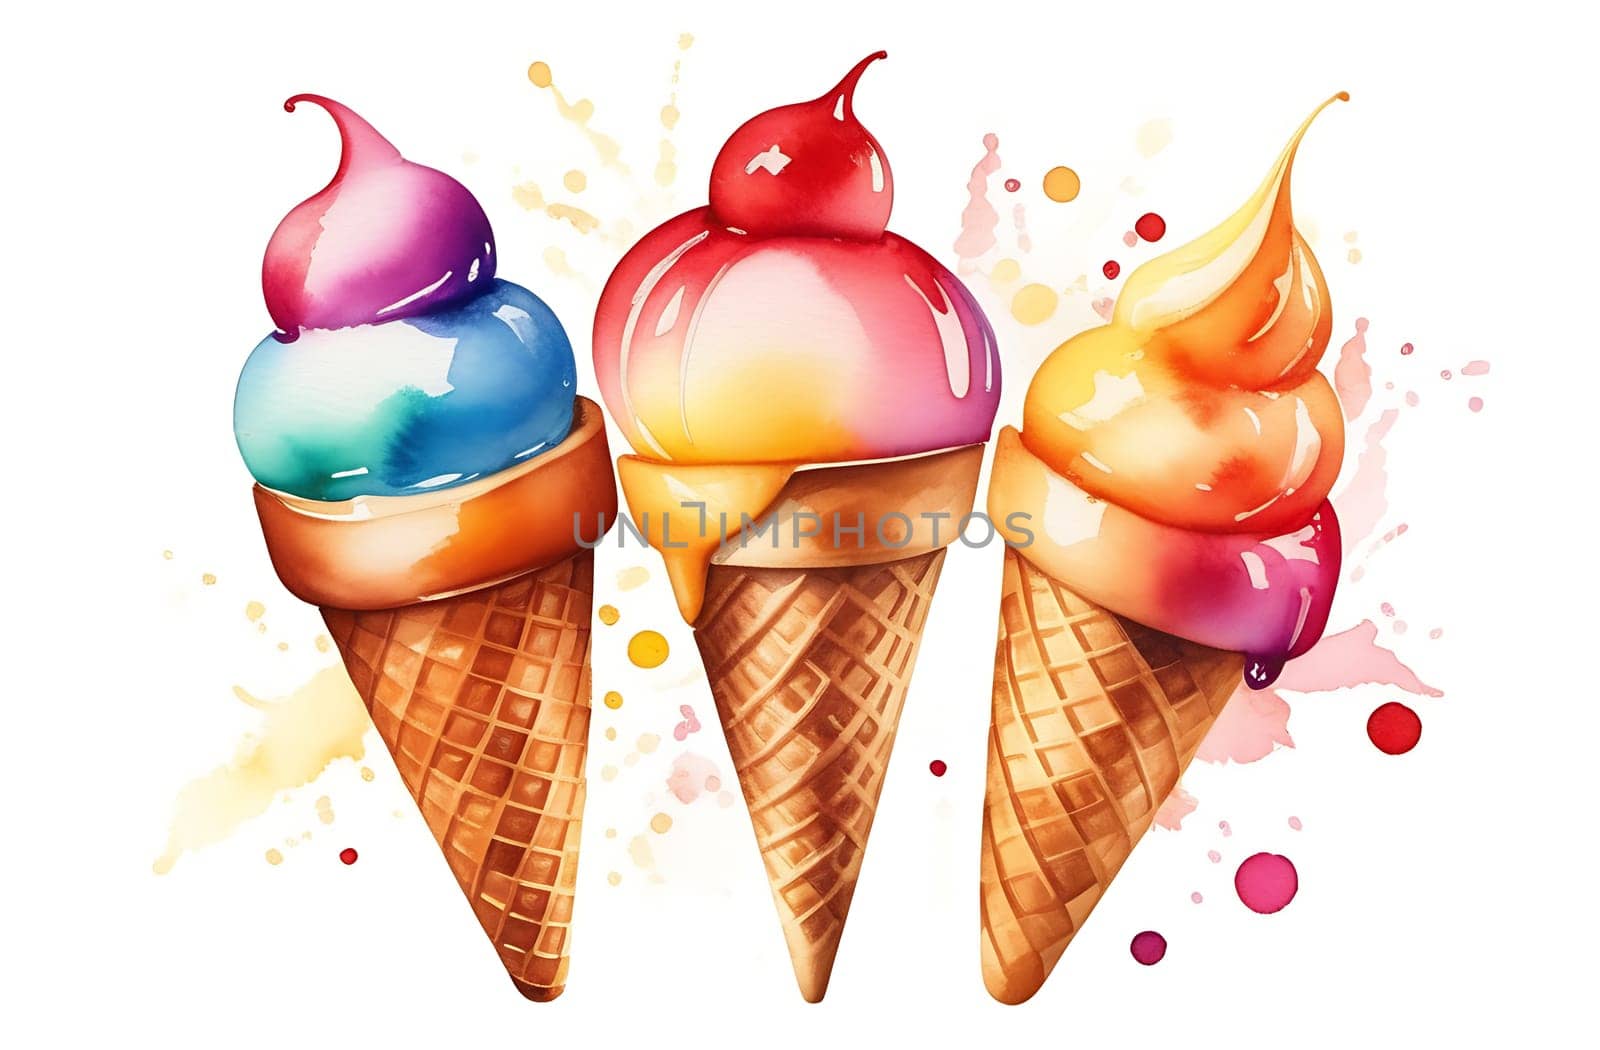 Three waffle cones on a multicolored watercolor background.